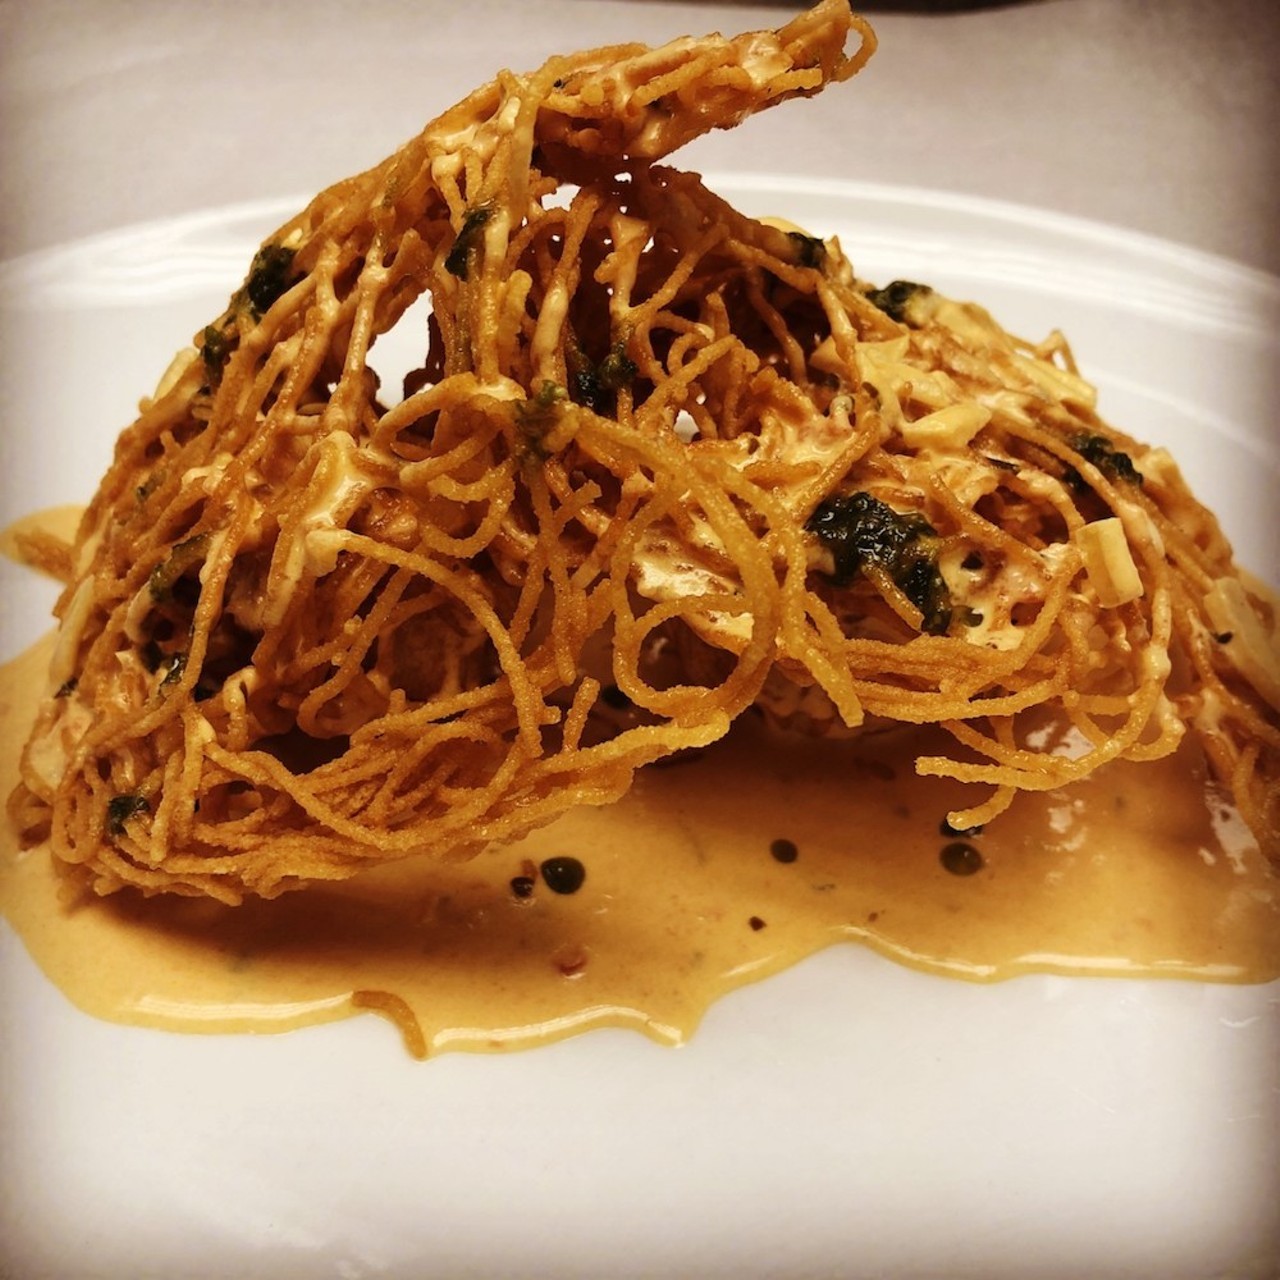 The Bird's Nest
What happens when Lock and Dam Eatery wraps two large scallops in angel hair pasta, then tops the deep-fried cluster of delicousness with lobster cream sauce.